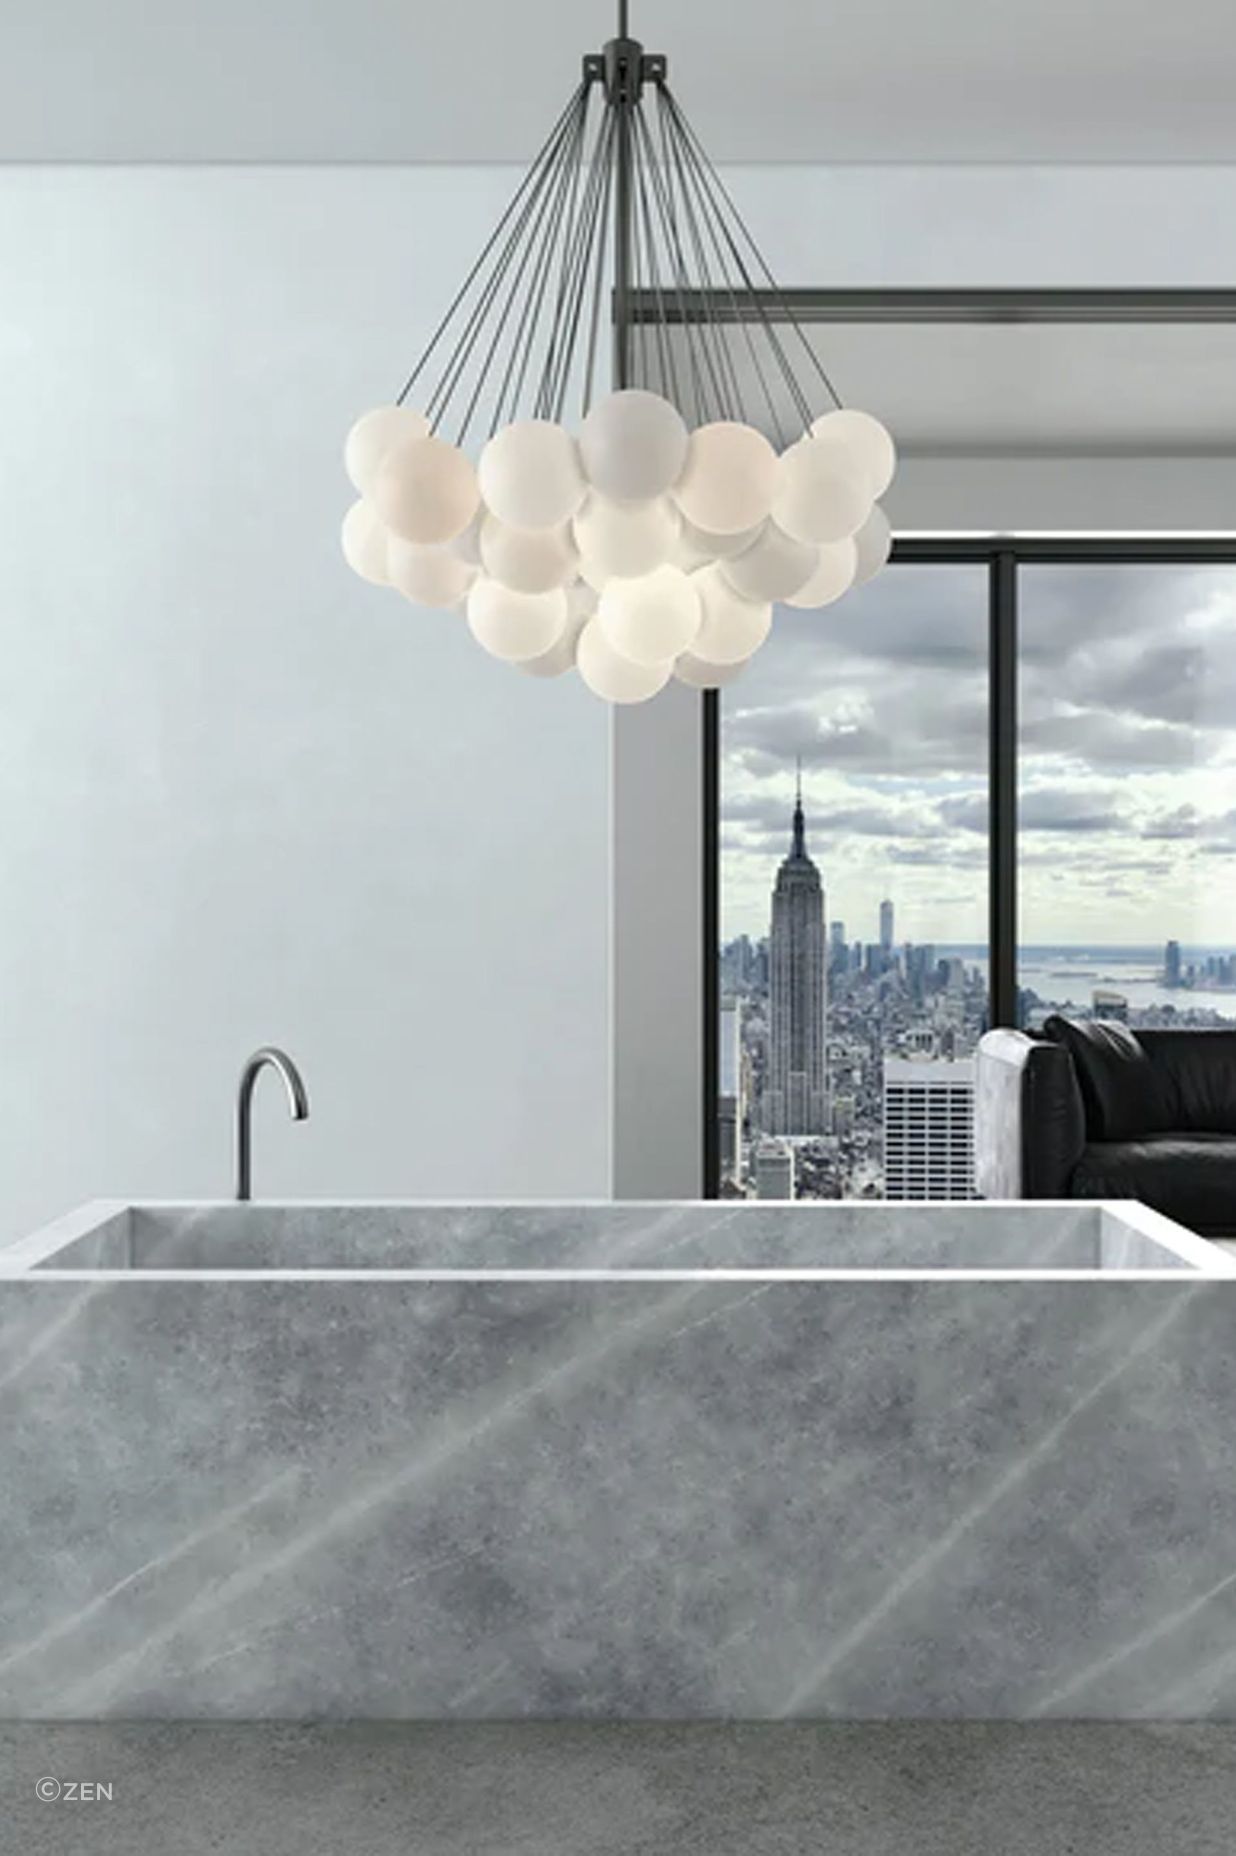 The stunning solid marble bathtub by Zen